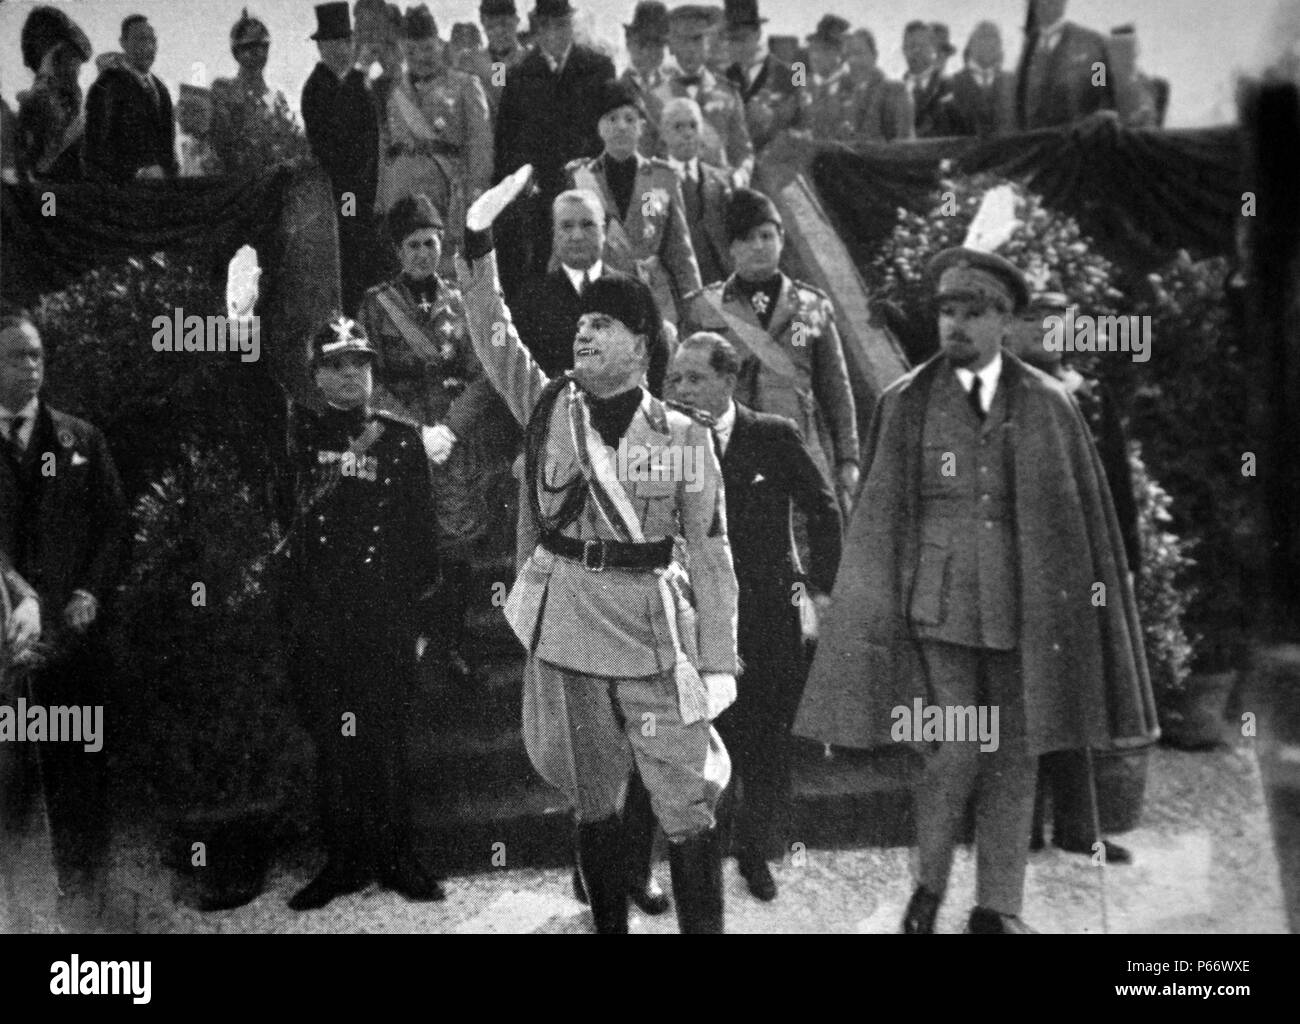 Rome', October 1928 - The Head of Government, Mussolini', and the highest in Authority attending the parade of the Metropolitans. Stock Photo